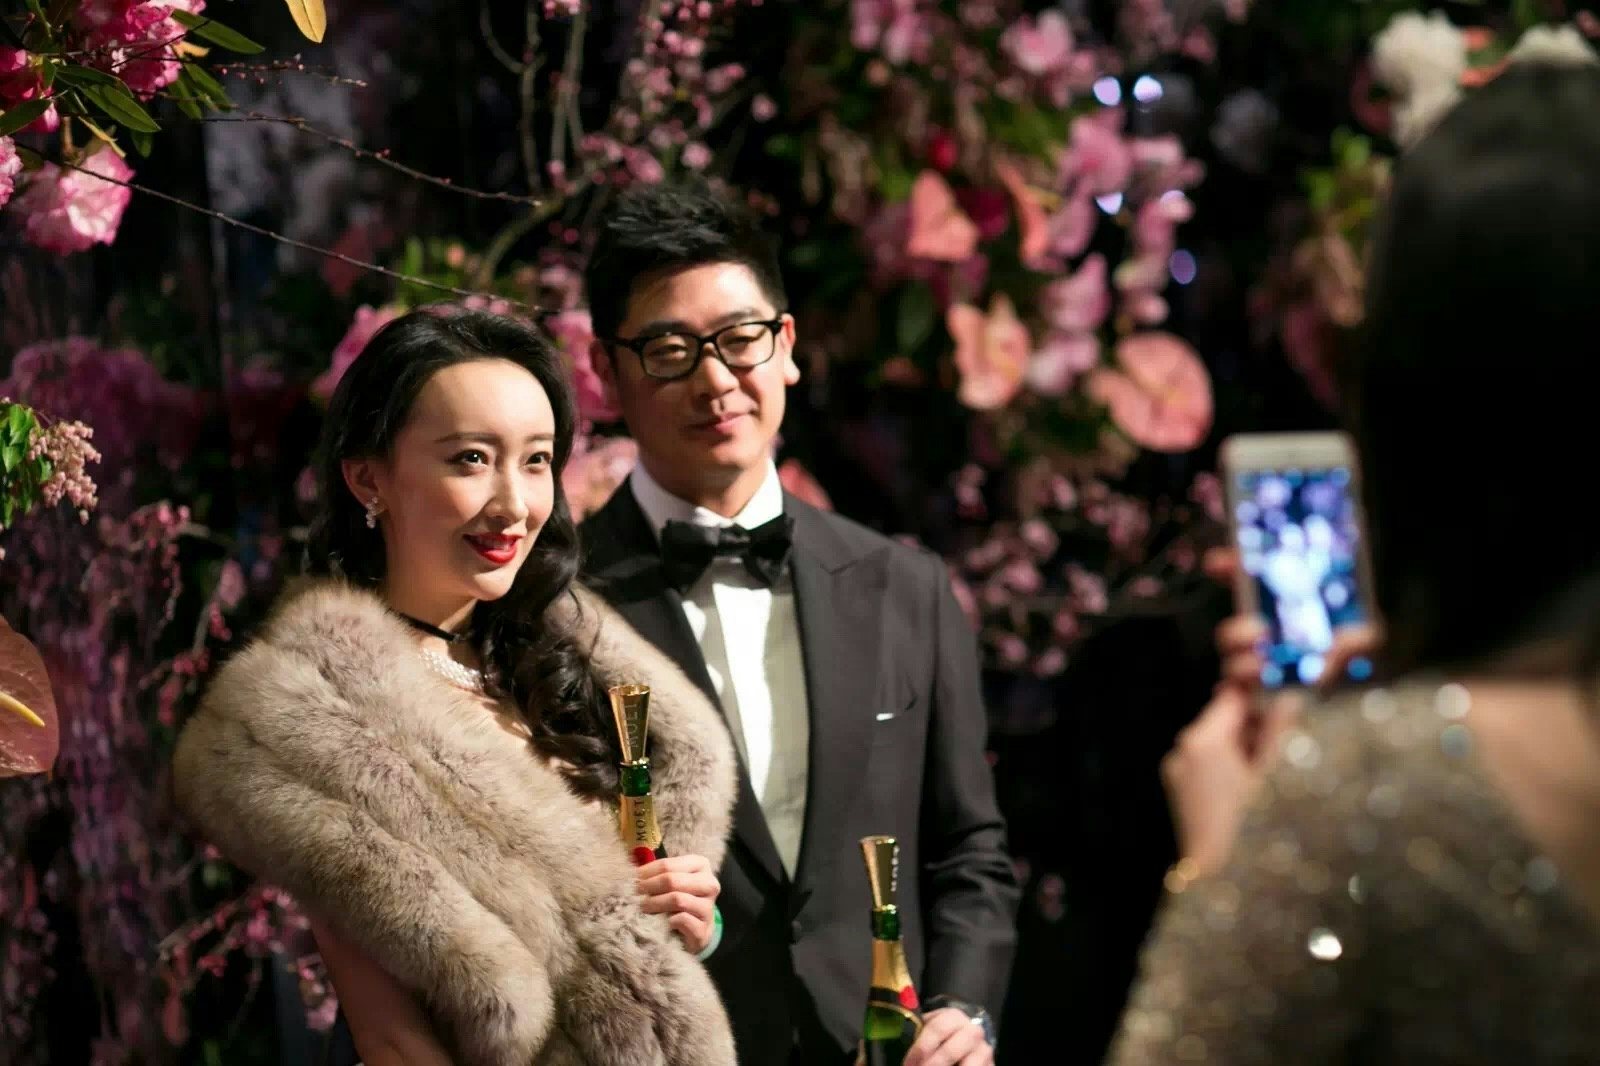 Chinese couple at the House of Dior event at the National Gallery of Victoria in Melbourne in September. Photo: Courtesy